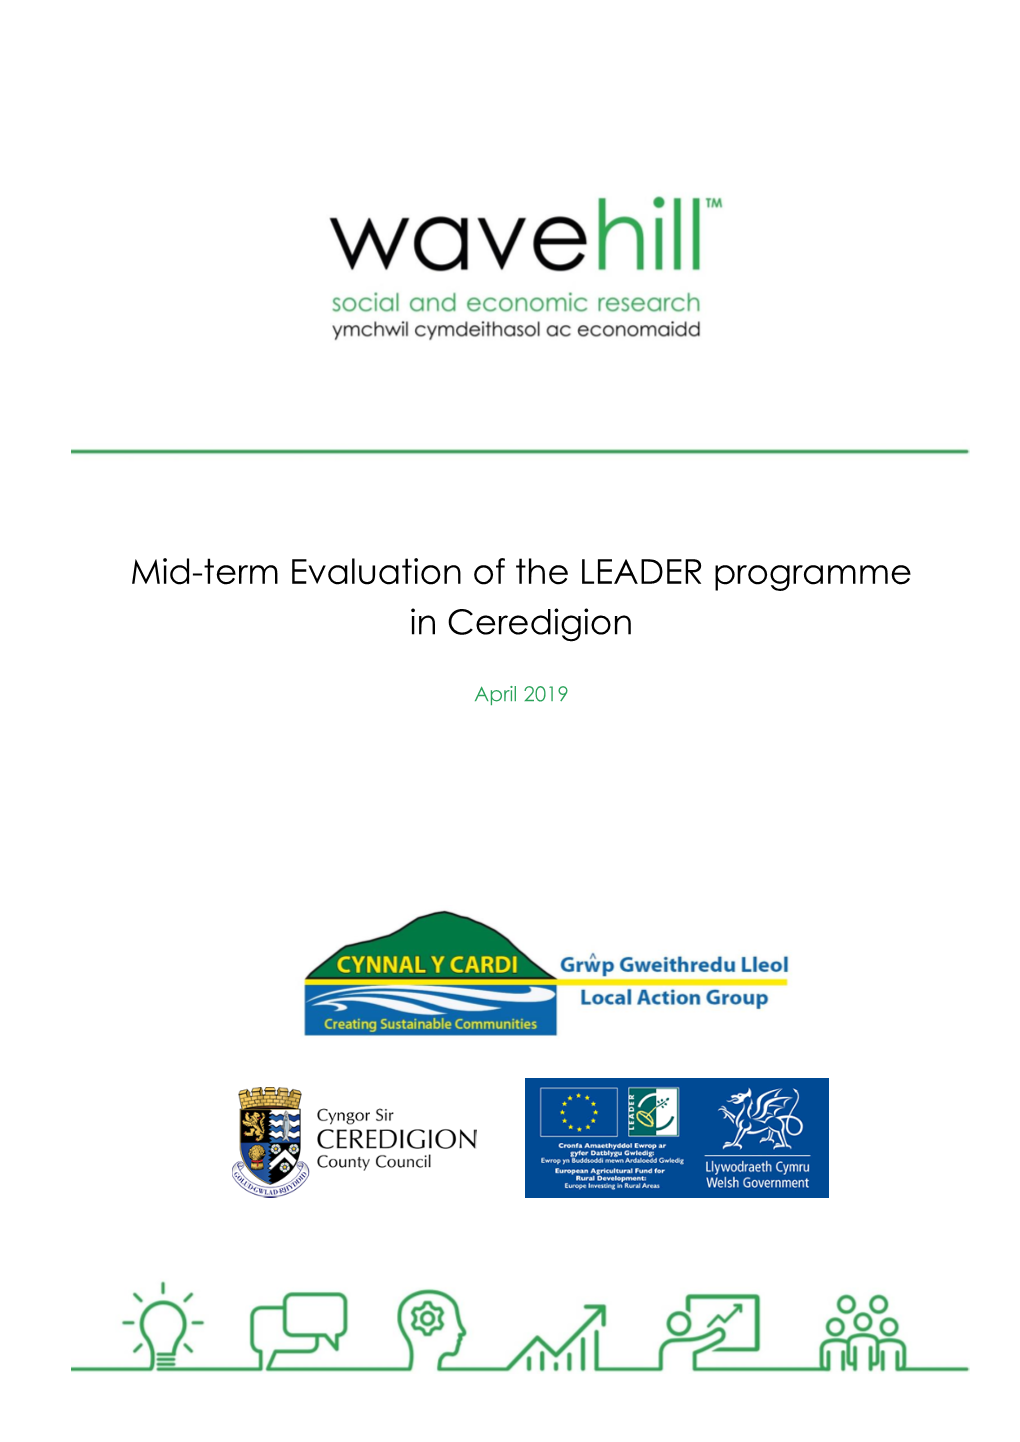 Mid-Term Evaluation of the LEADER Programme in Ceredigion